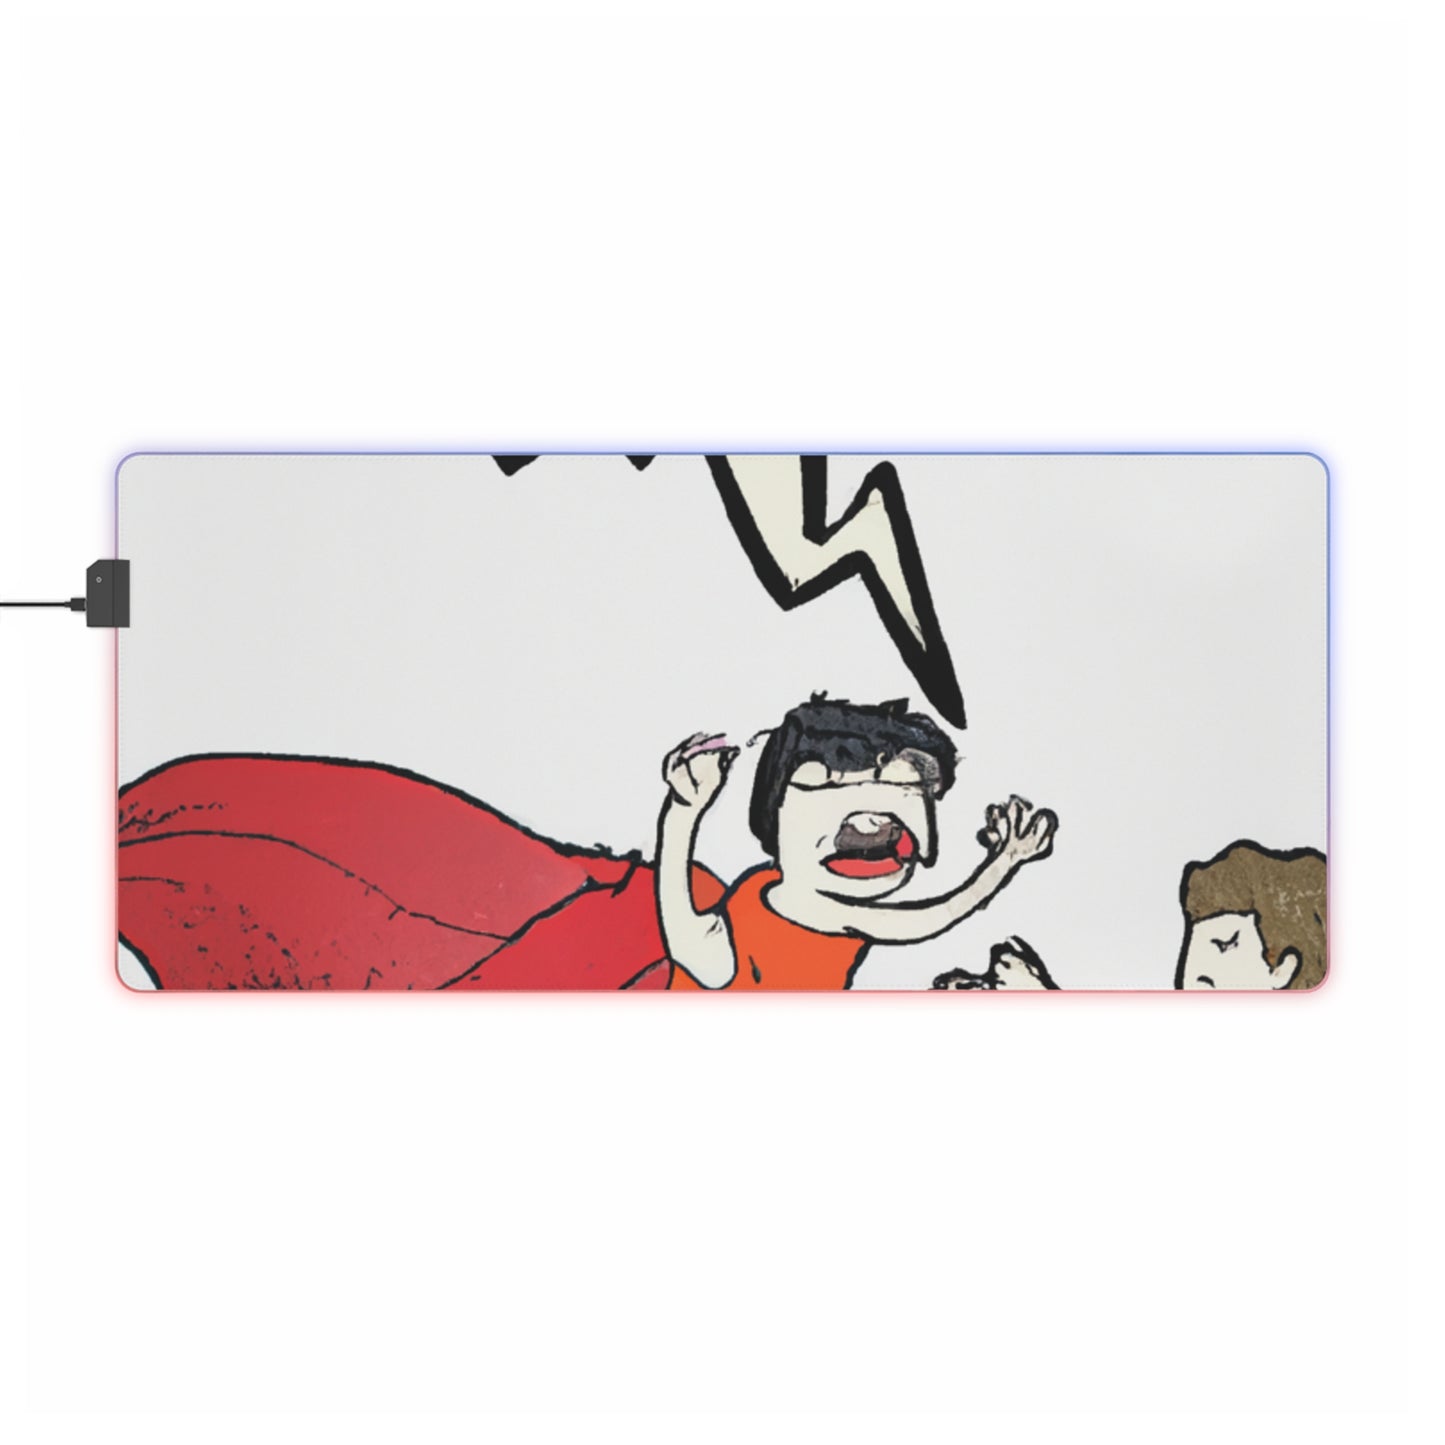 Rocky Rocketman - Comic Book Collector LED Light Up Gaming Mouse Pad